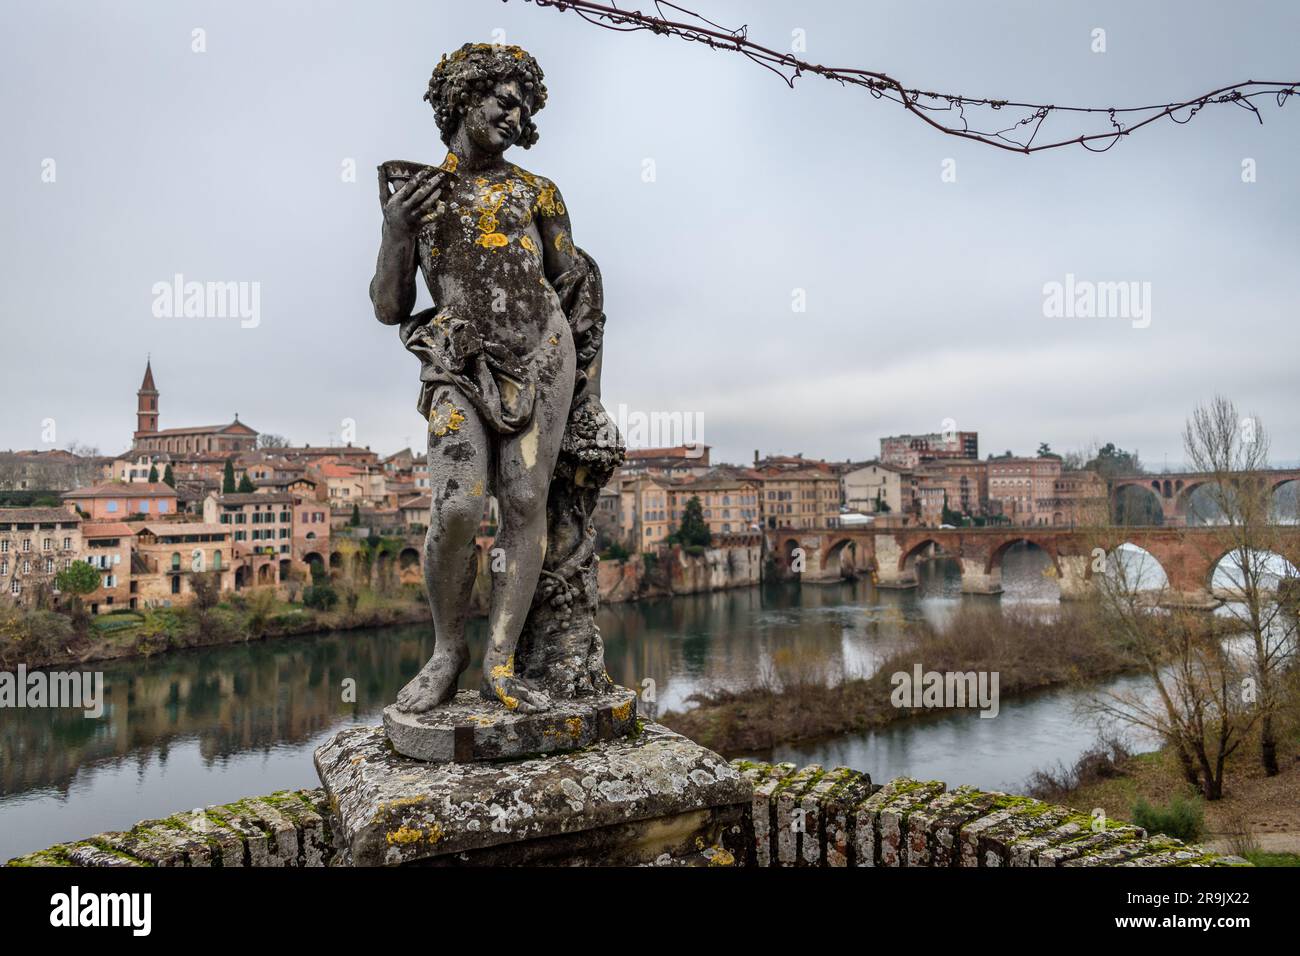 Bacchus state at the Palais de La Berbie bishop's palace gardens, overlooking the River Tarn and the city of Albi. Stock Photo